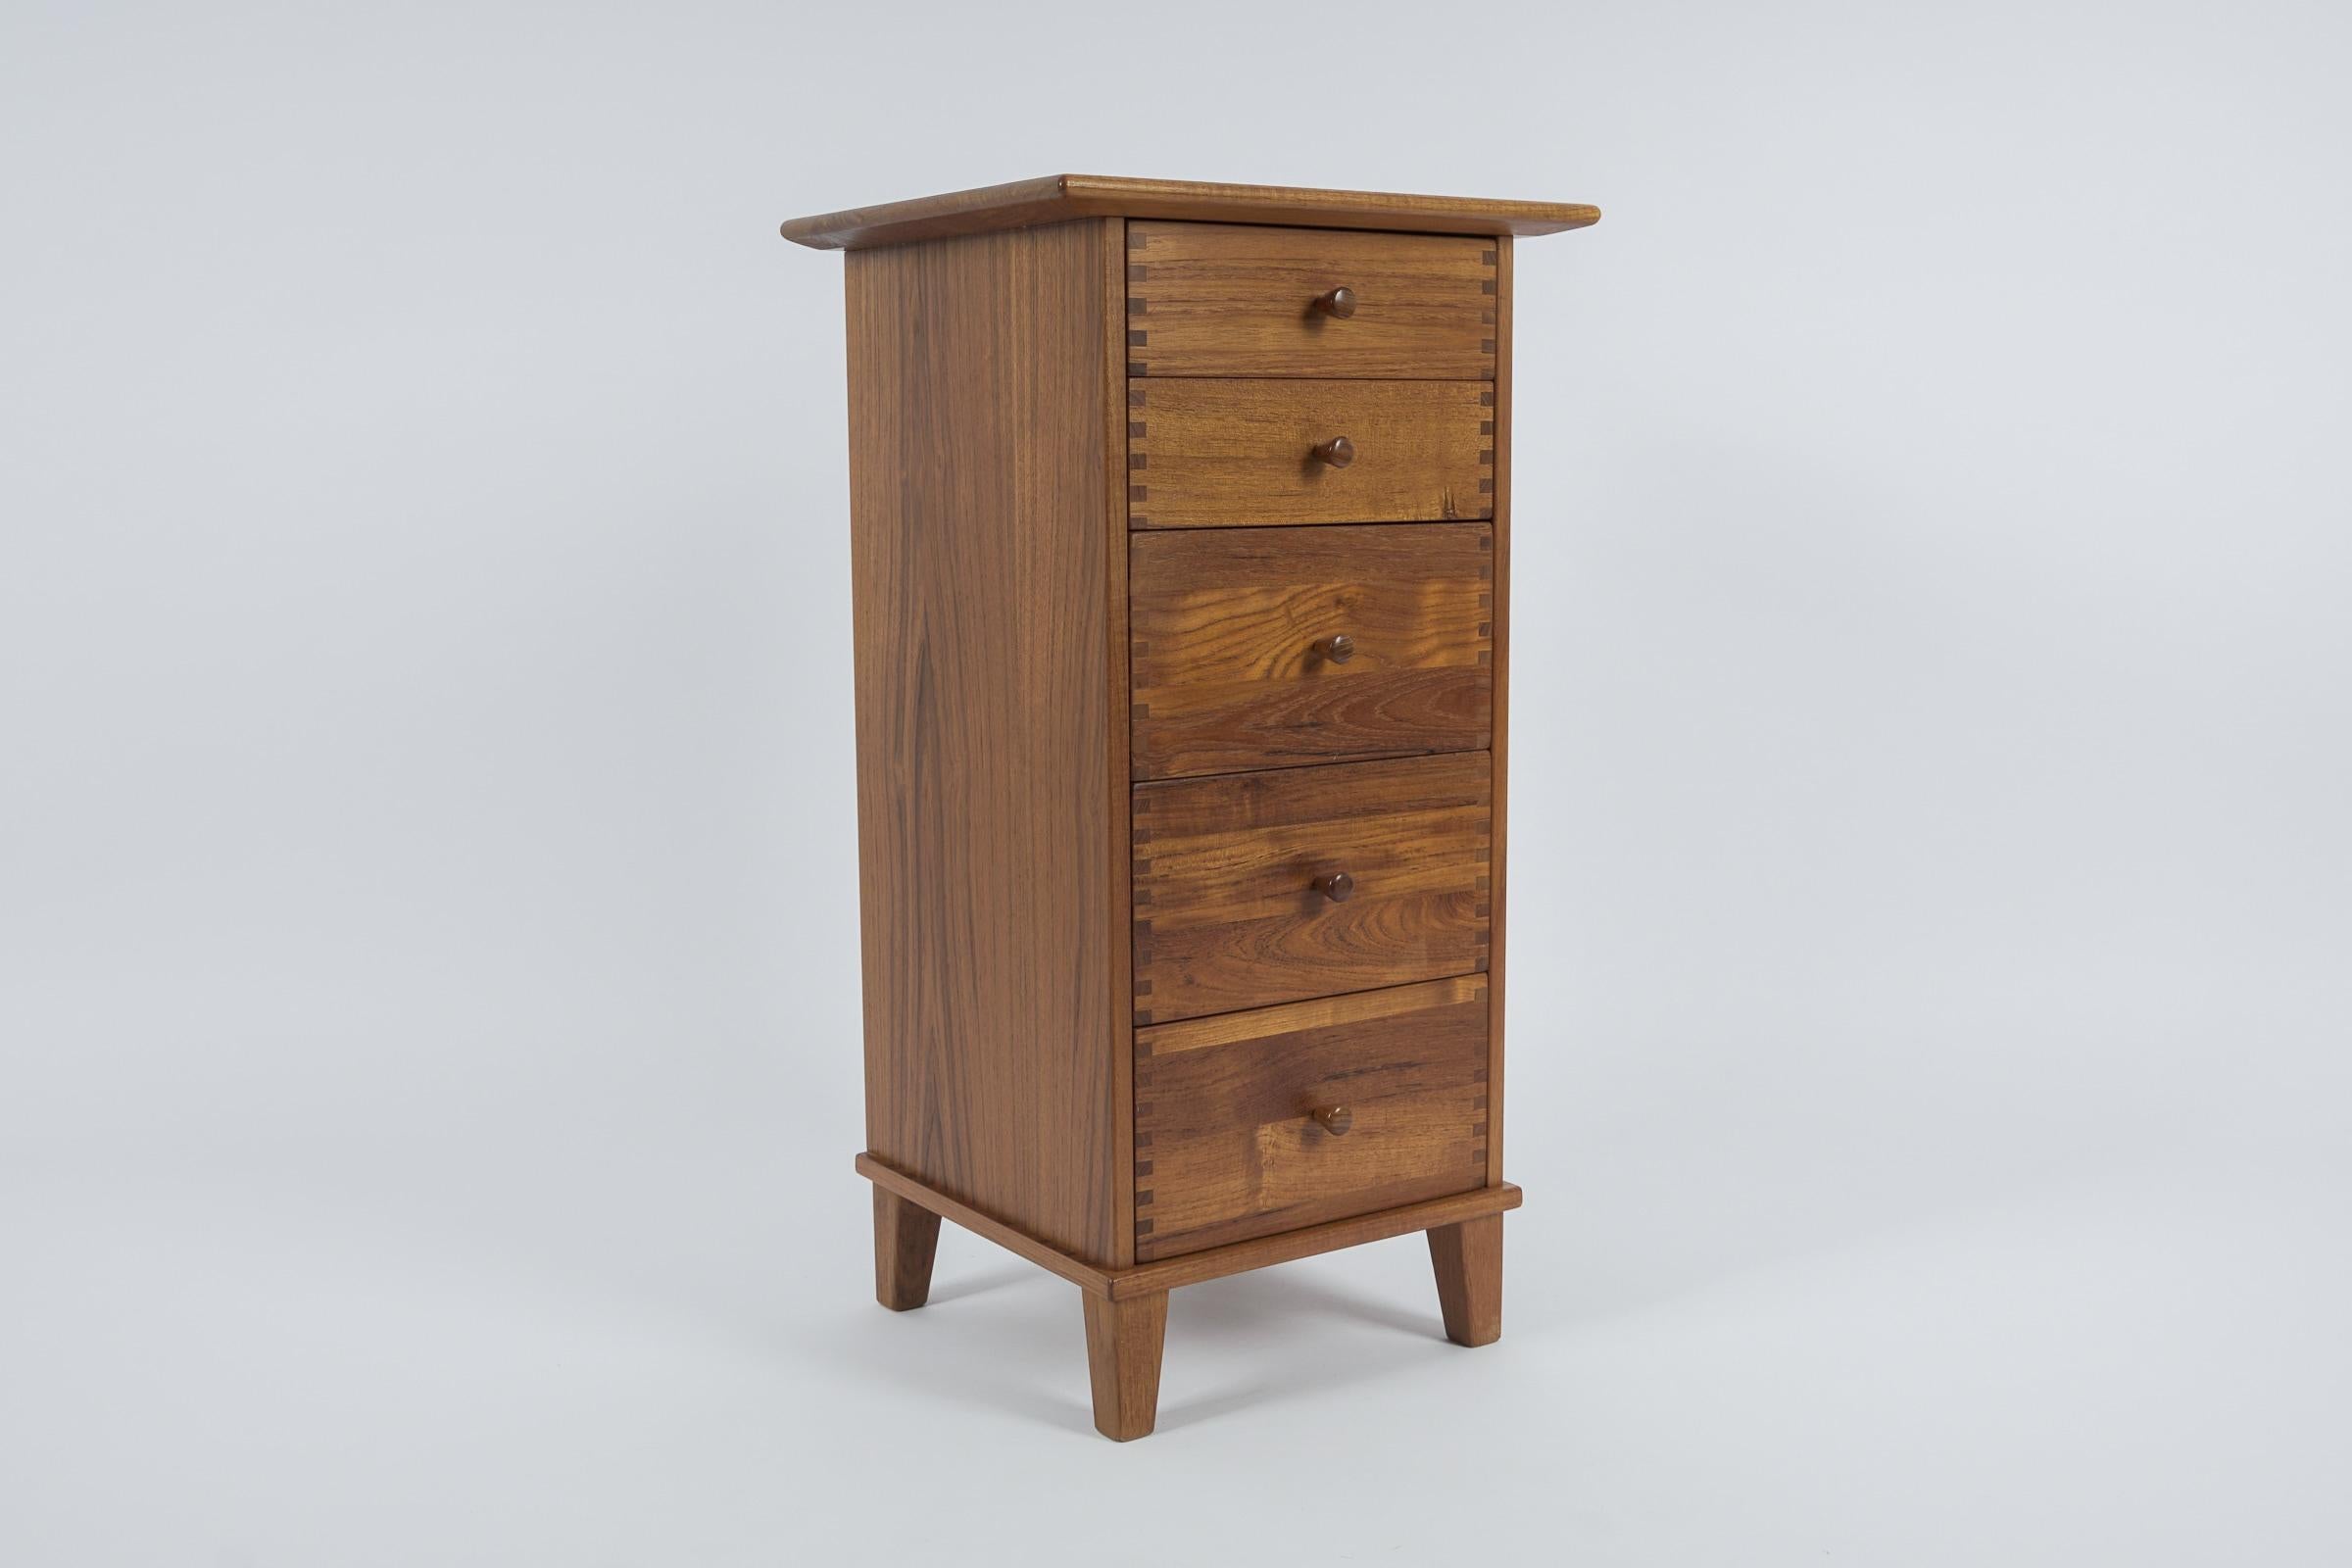 A gorgeous Danish modern five-drawer teak lingerie chest by Aksel Kjersgaard.

Ca. 1980s. Made in Denmark.

The chest is exquisite. The quality is top notch with all solid wood dovetailed drawers and a finished back. The top has an overhang and